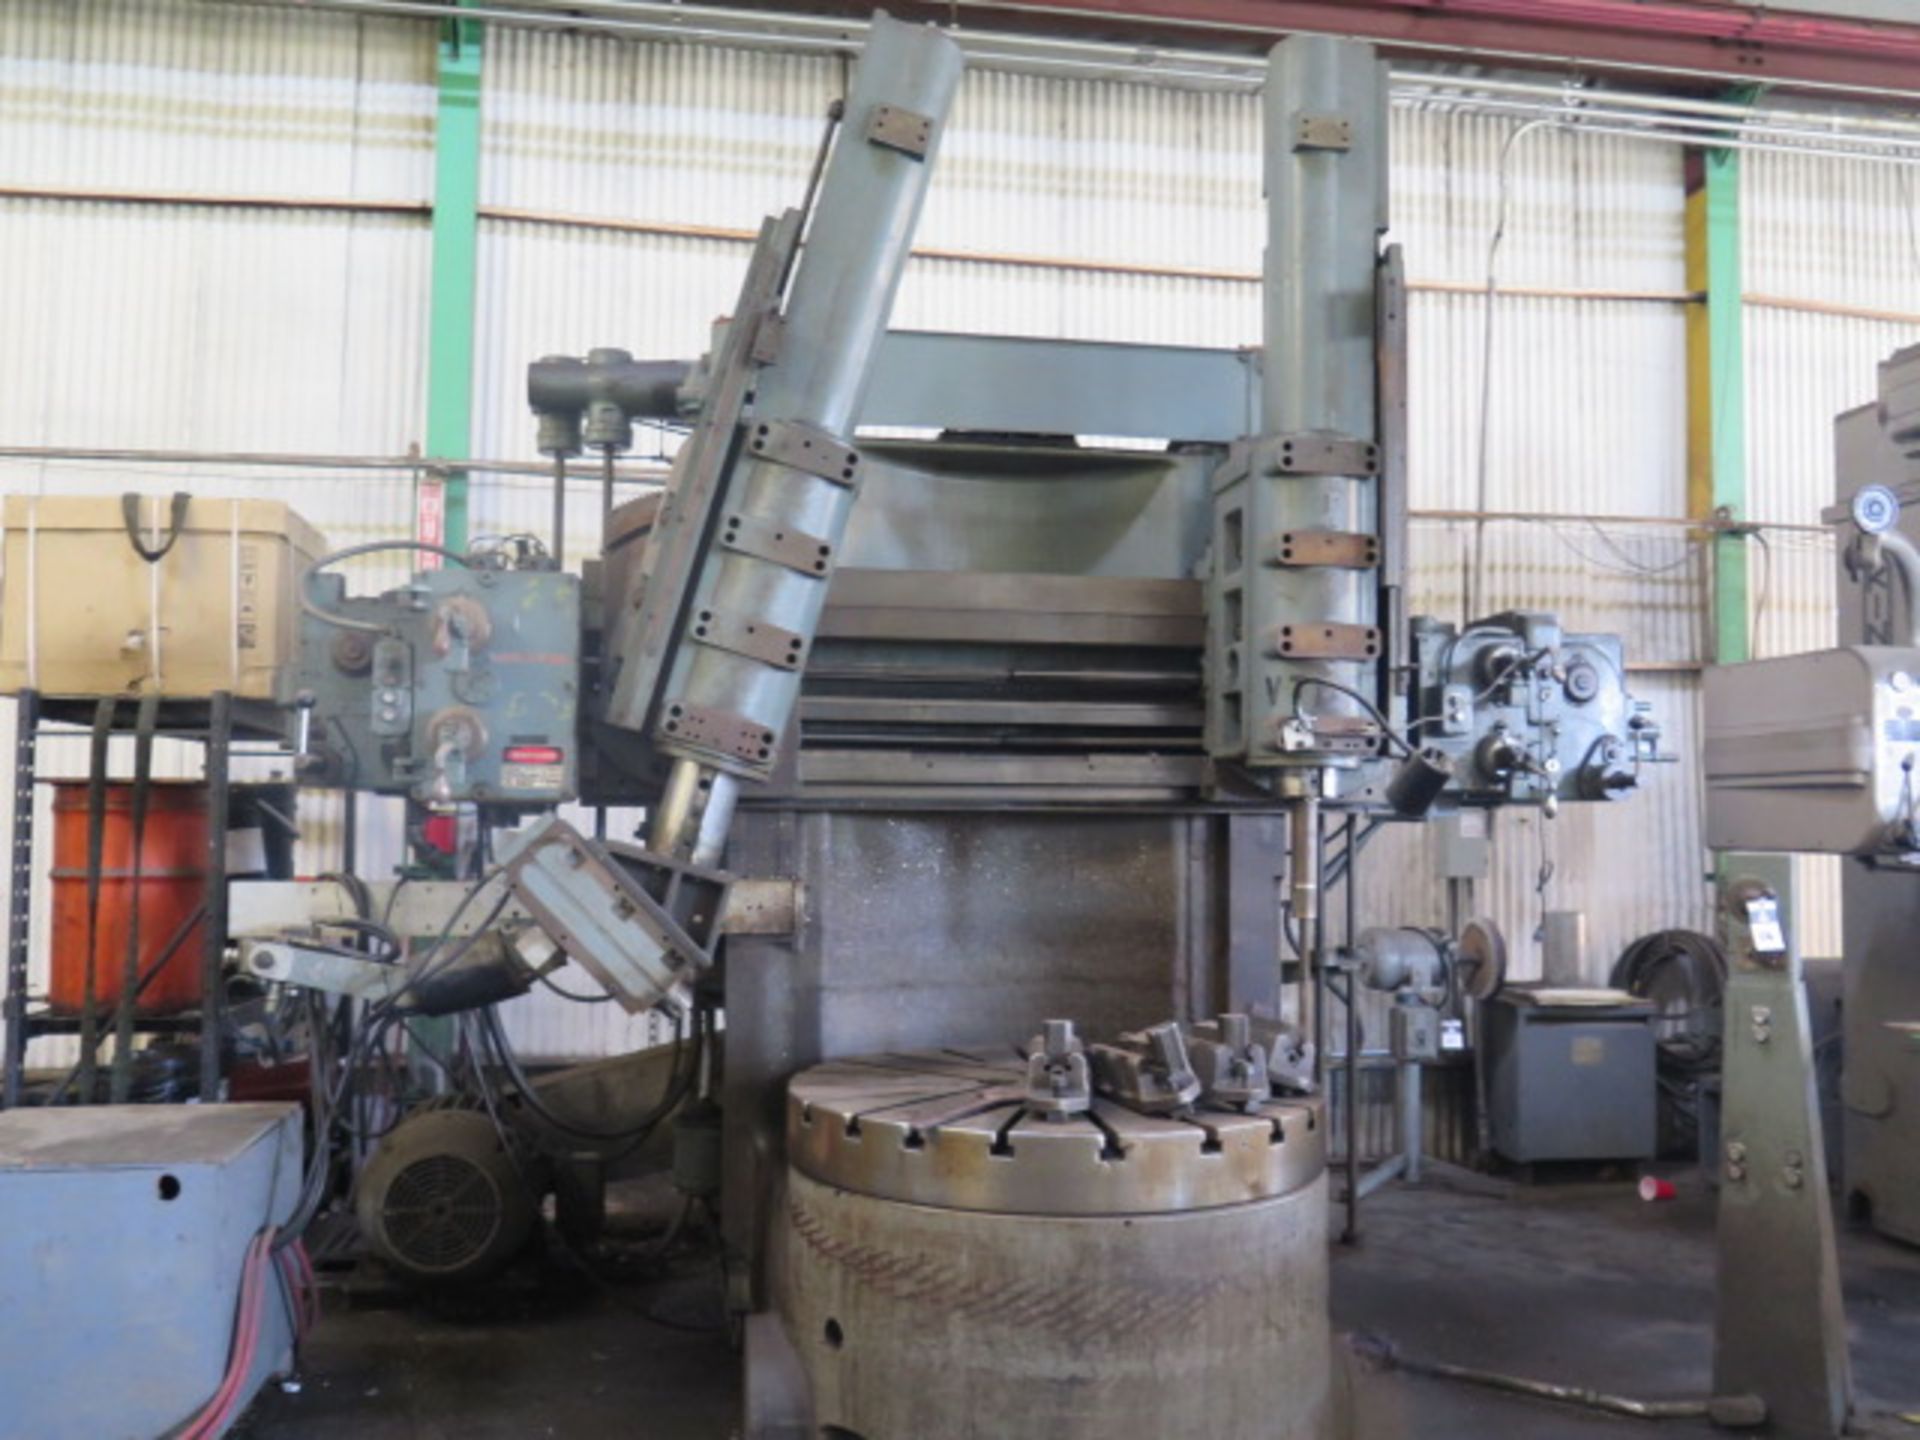 Bullard 54” Vertical Boring Mill w/ 4.3-160 RPM, 63” Swing, Hyd Tracer Head, SOLD AS IS - Image 2 of 17